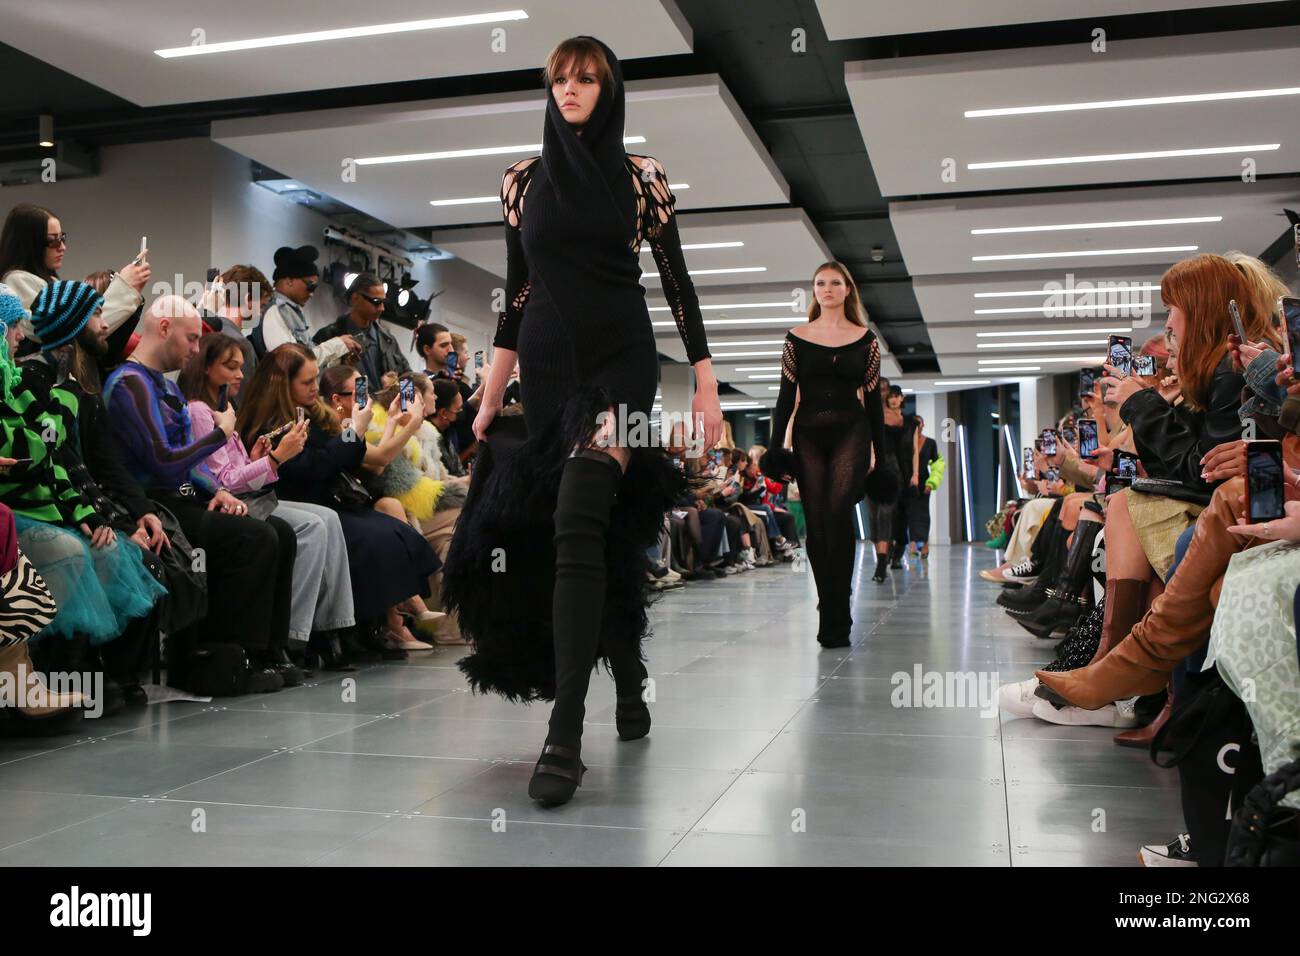 Models on catwalk mark fast fashion show in courtyard space hi-res